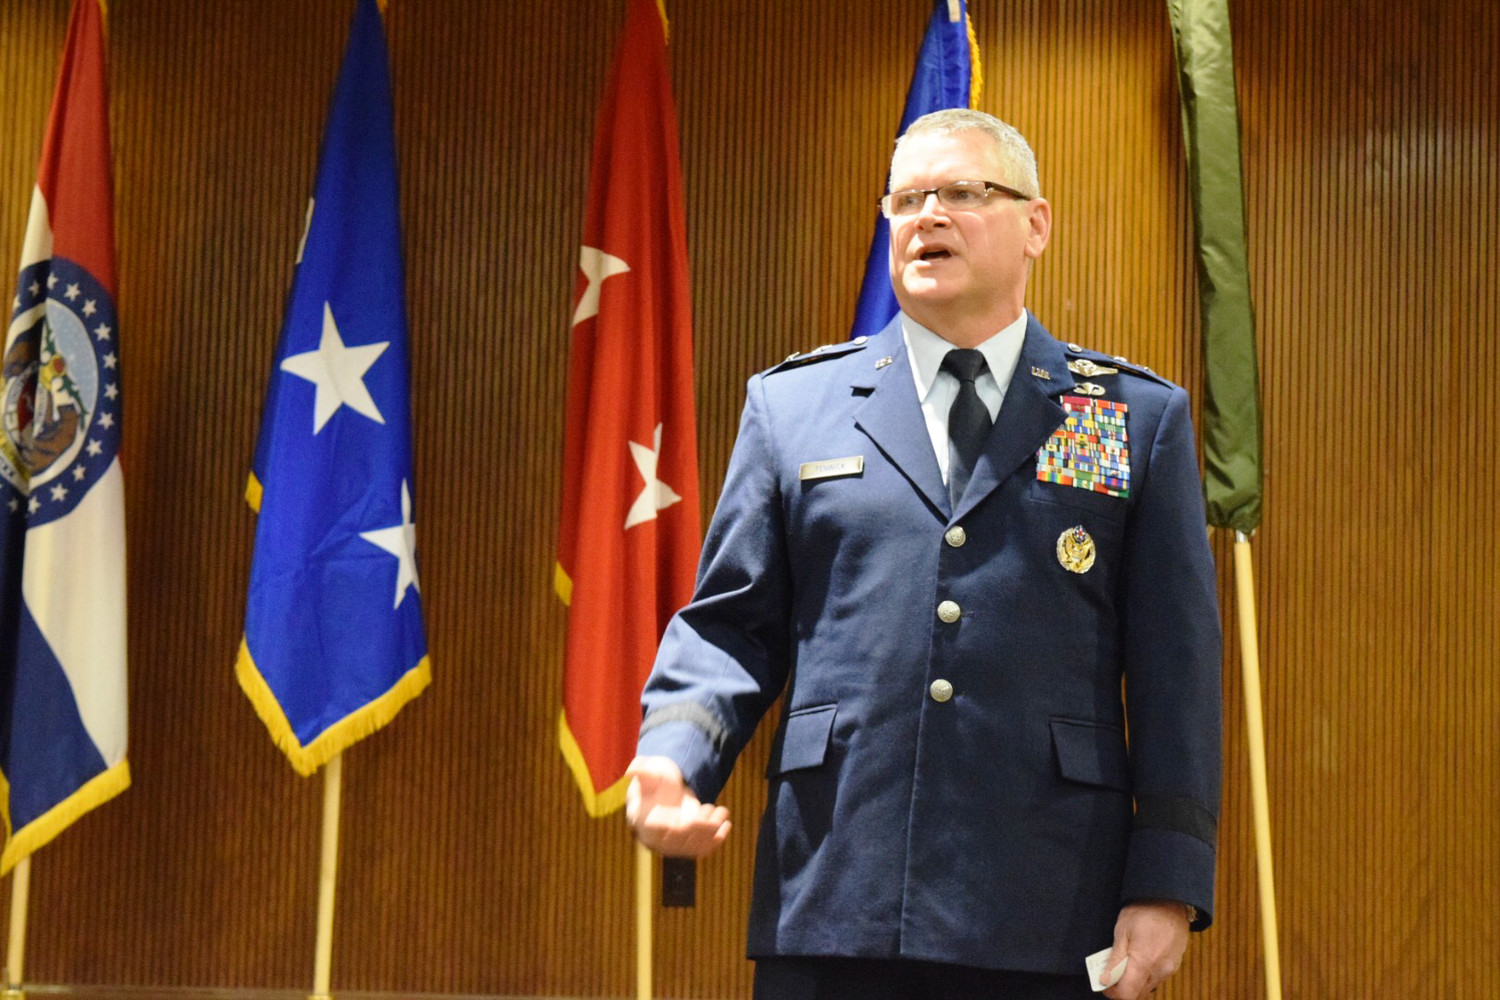 Health Hero
CoxHealth emergency physician Jerry Fenwick is promoted Jan. 17 to major general in the U.S. Air Force, becoming one of four with the title in the Air Force Medical Service. Air Force Surgeon Gen. Mark Ediger came to Cox South from Washington, D.C., to perform the ceremony.